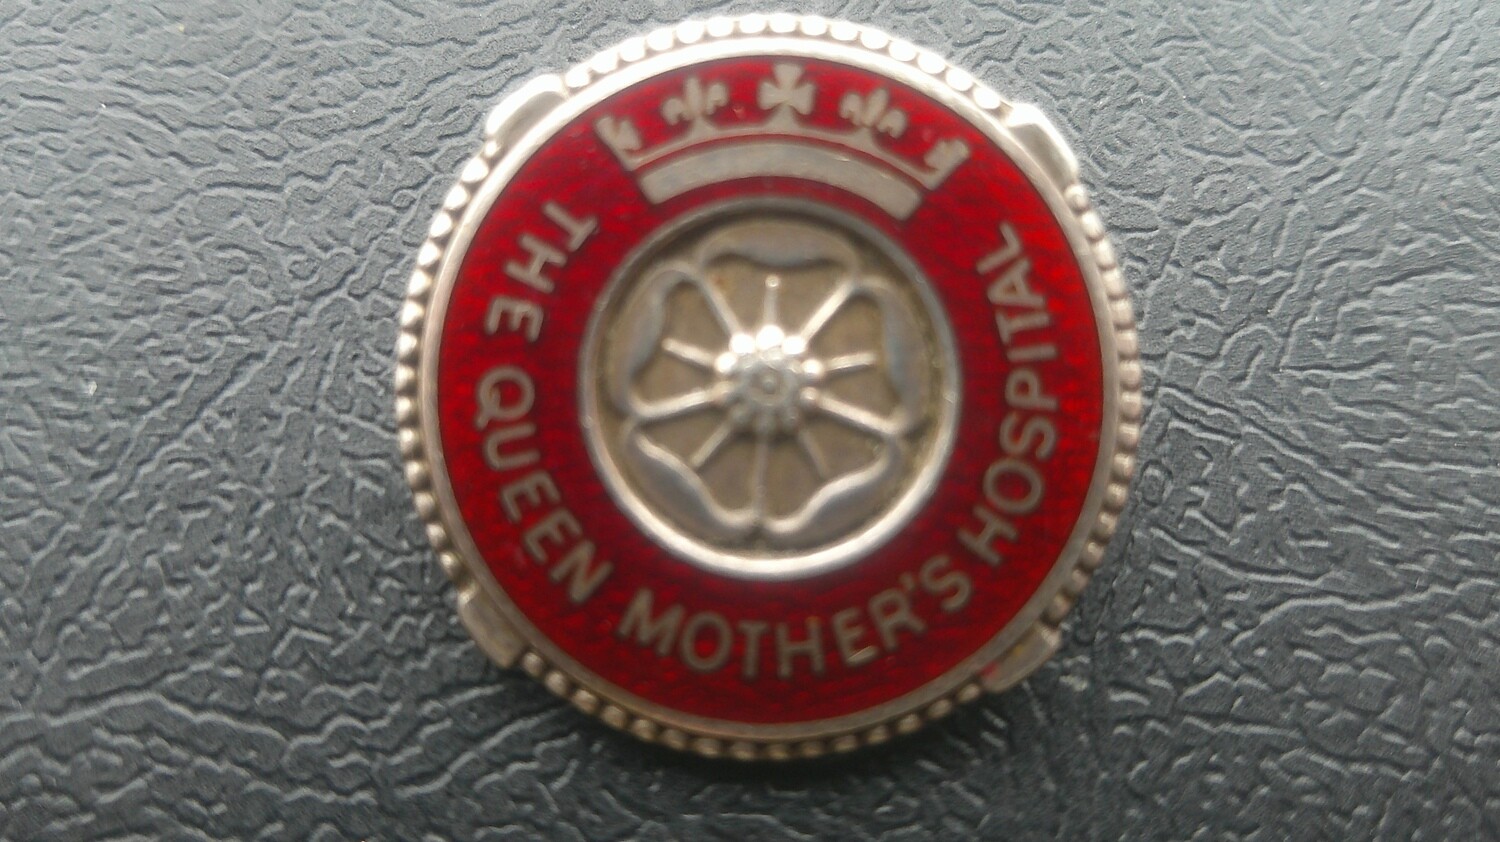 The Queen Mothers Hospital Glasgow Silver Badge